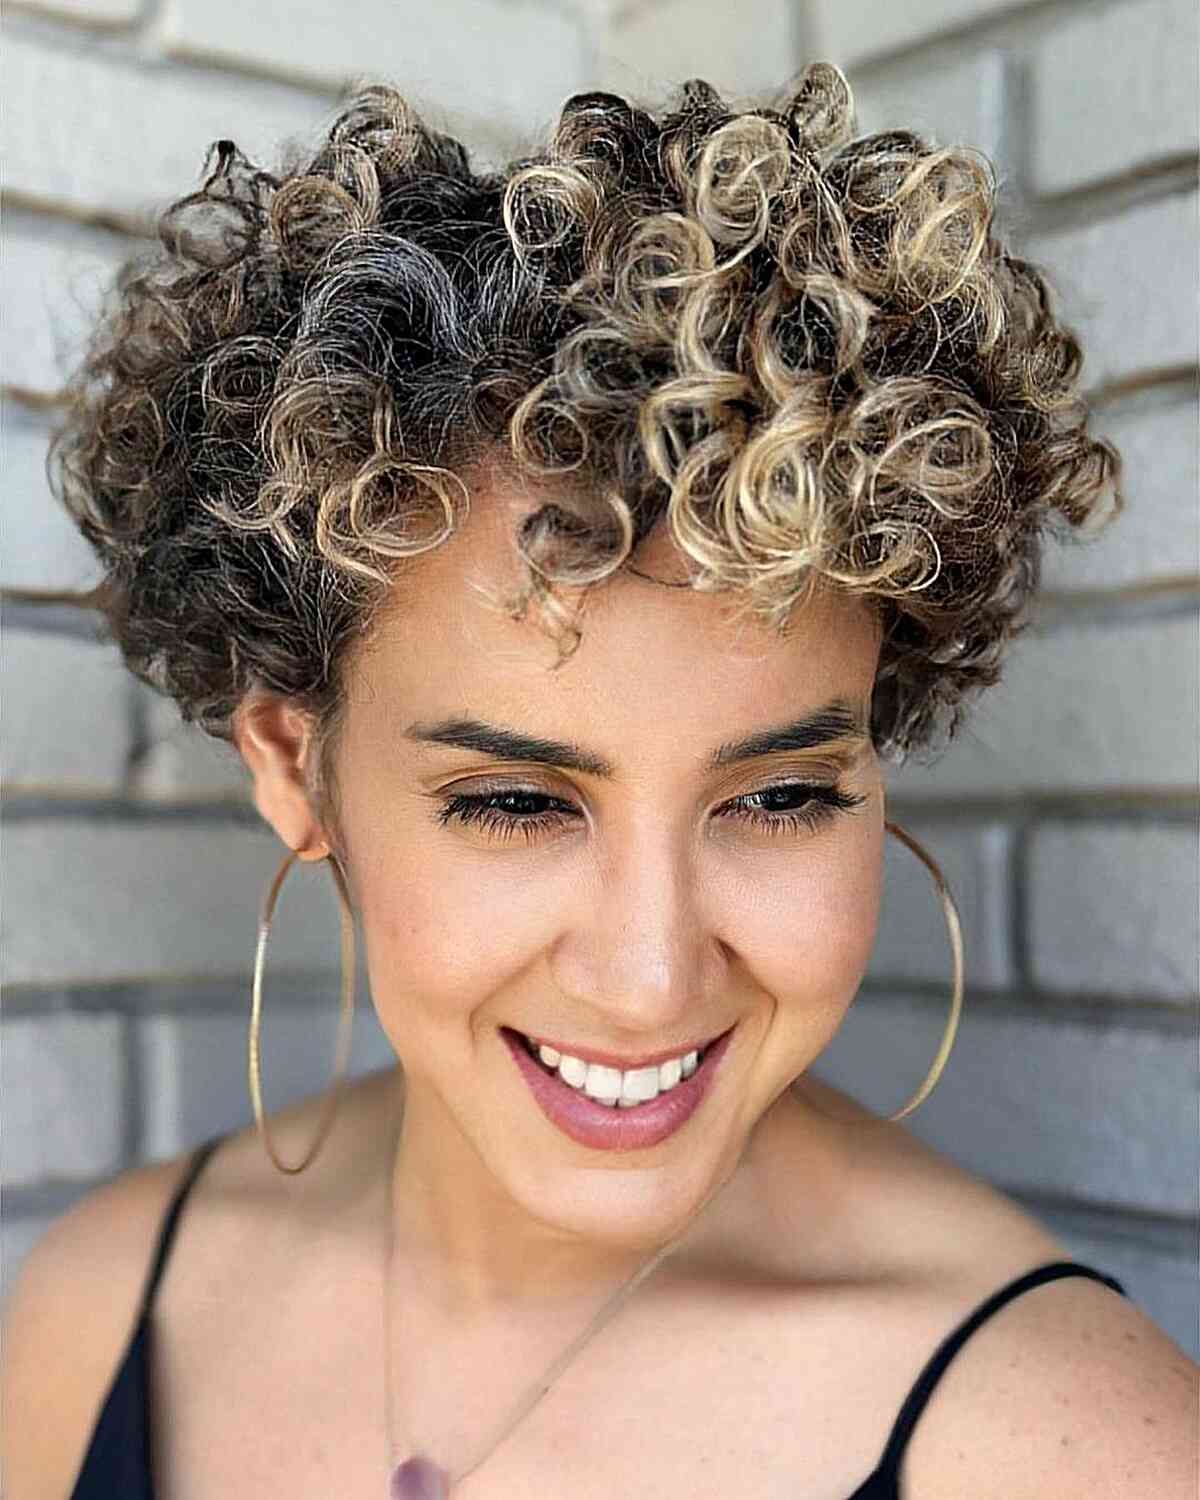 Can You Pull Off Short Type 3 Hair? | NaturallyCurly.com